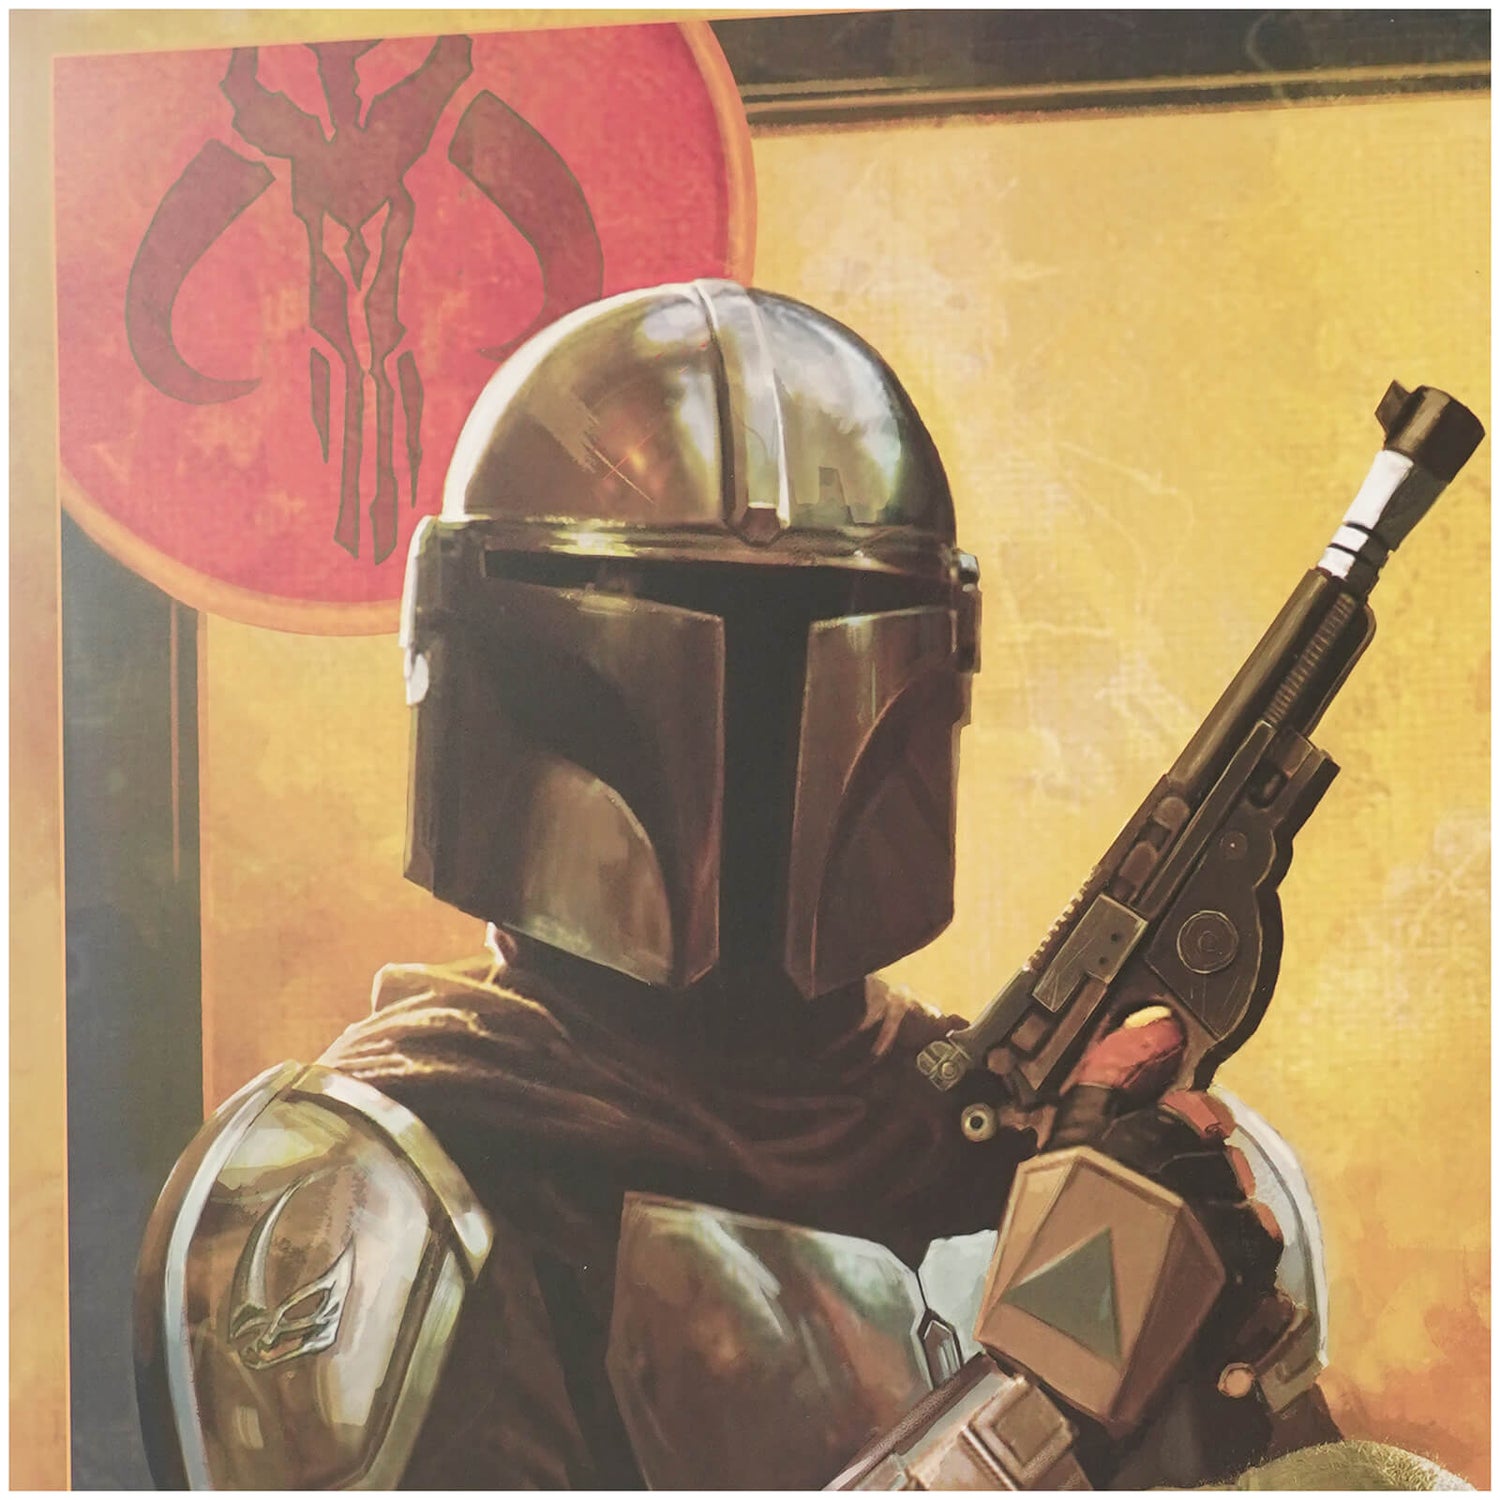 Star Wars The Mandalorian "Tribe of Two" Lithographie von Kayla Woodside